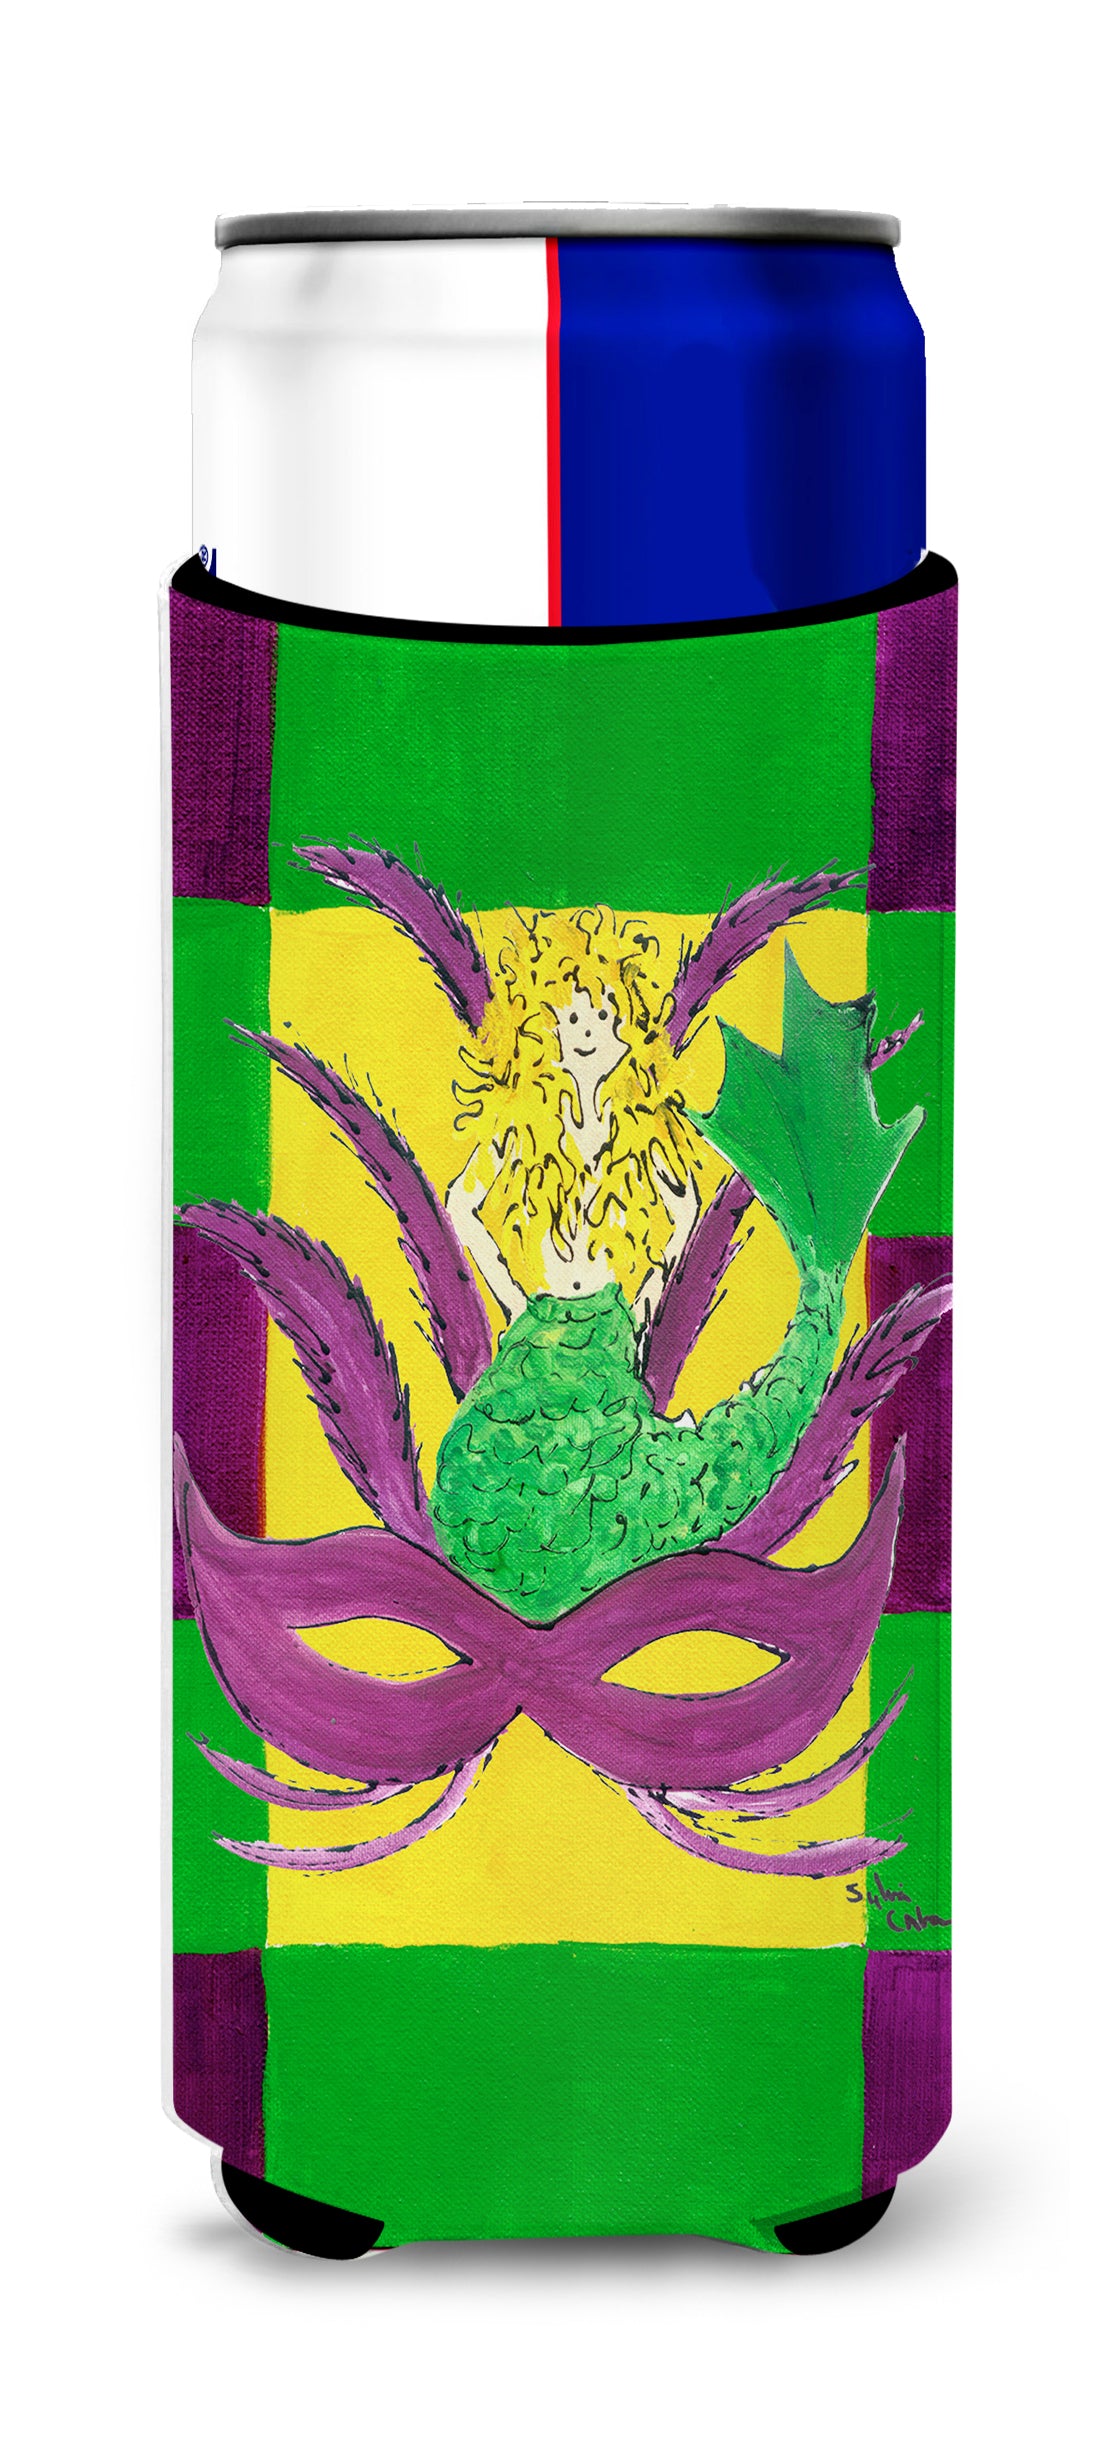 Mardi Gras Blonde Mermad with Mask Ultra Beverage Insulators for slim cans 8162MUK.